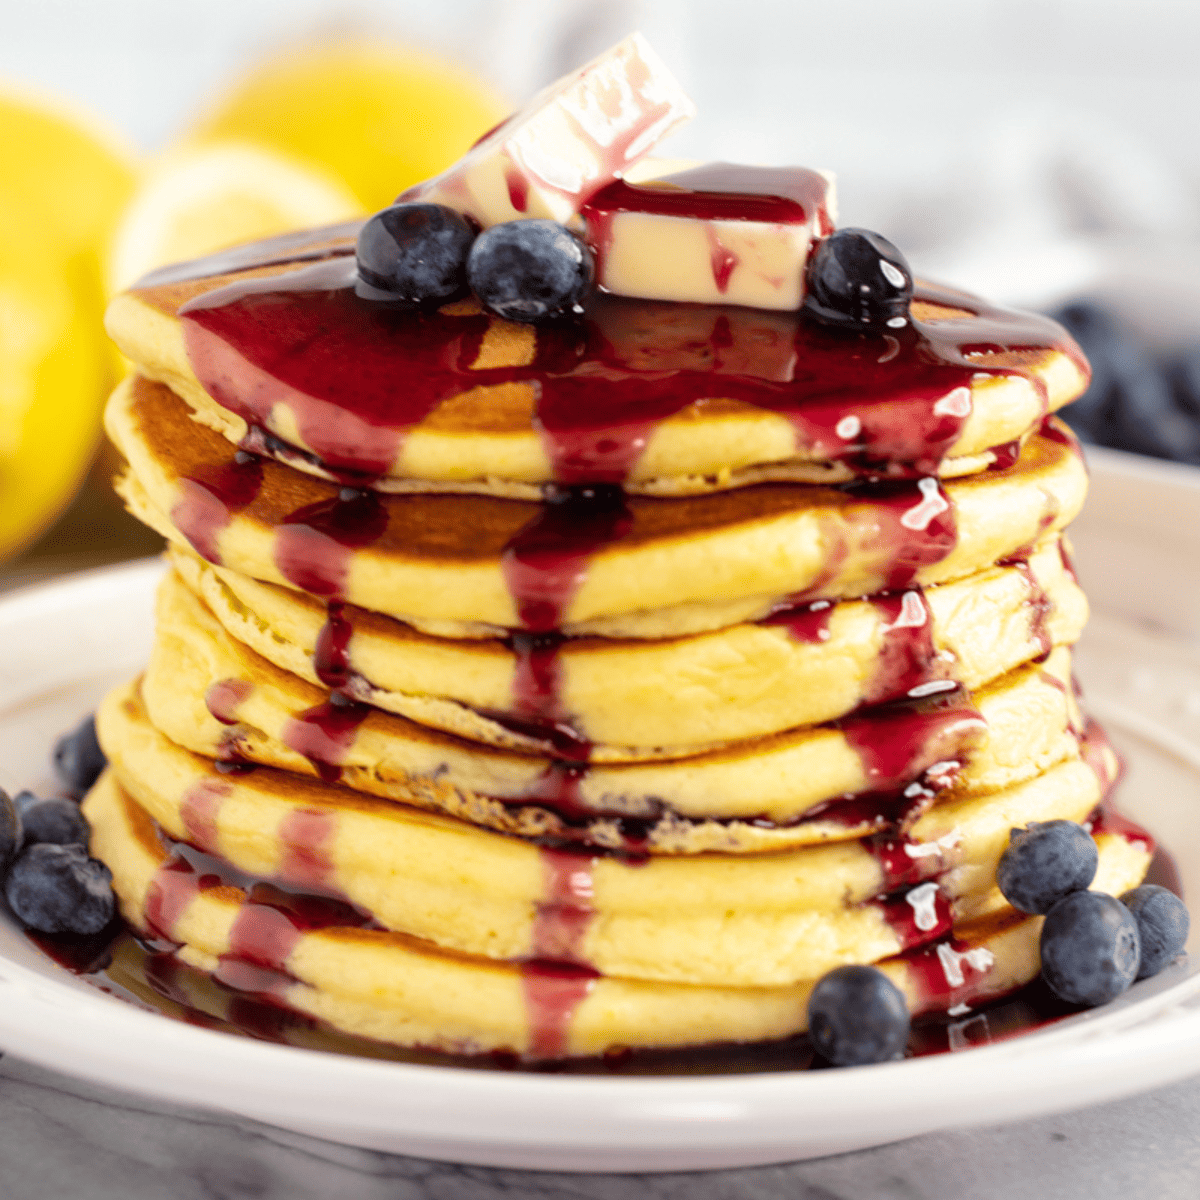 Stack of lemon ricotta pancakes topped with blueberry syrup and fresh blueberries.